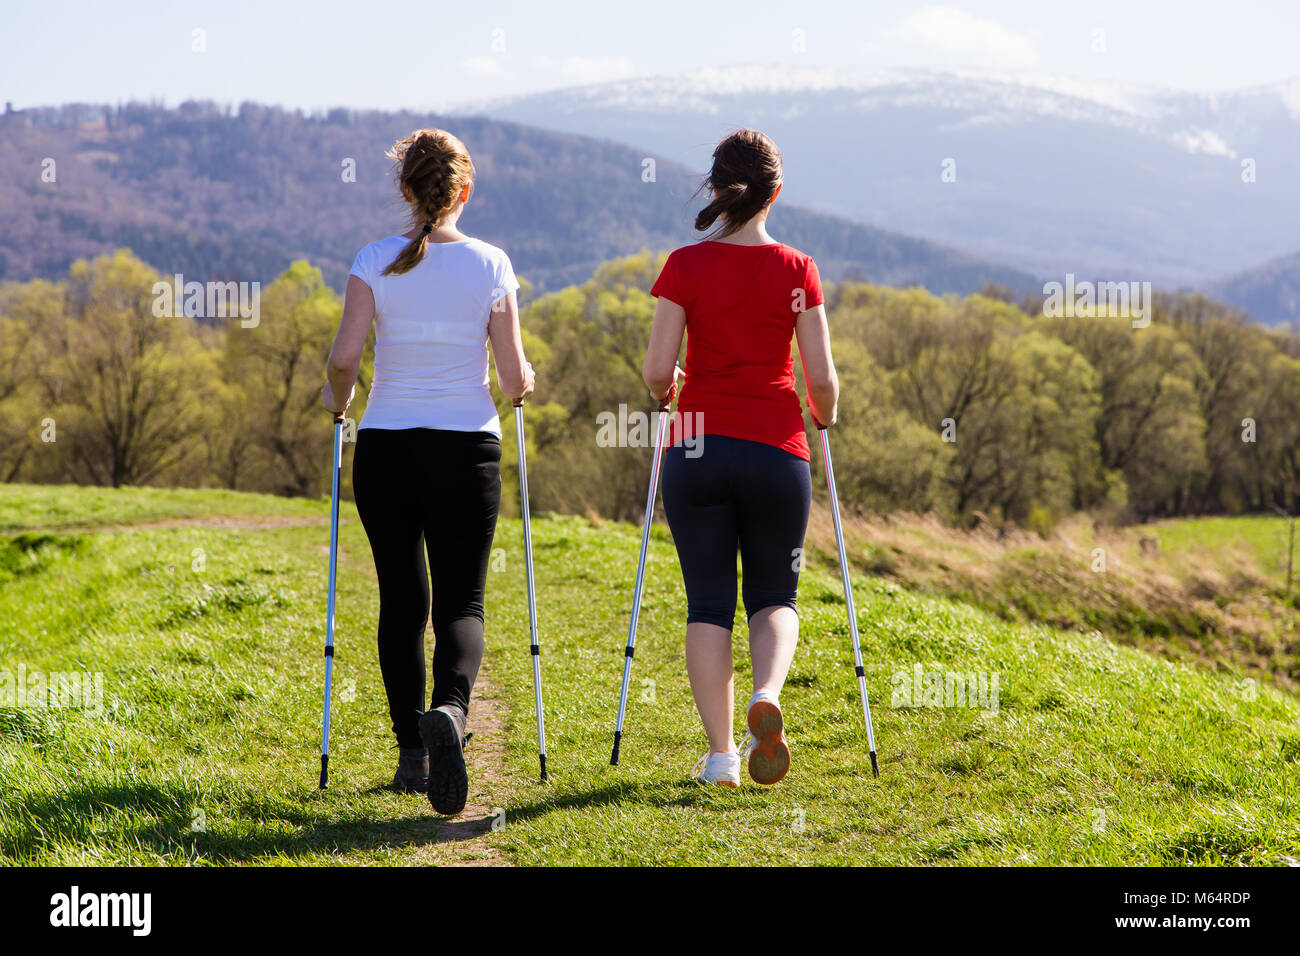 Nordic walking - active people working out outdoor Stock Photo